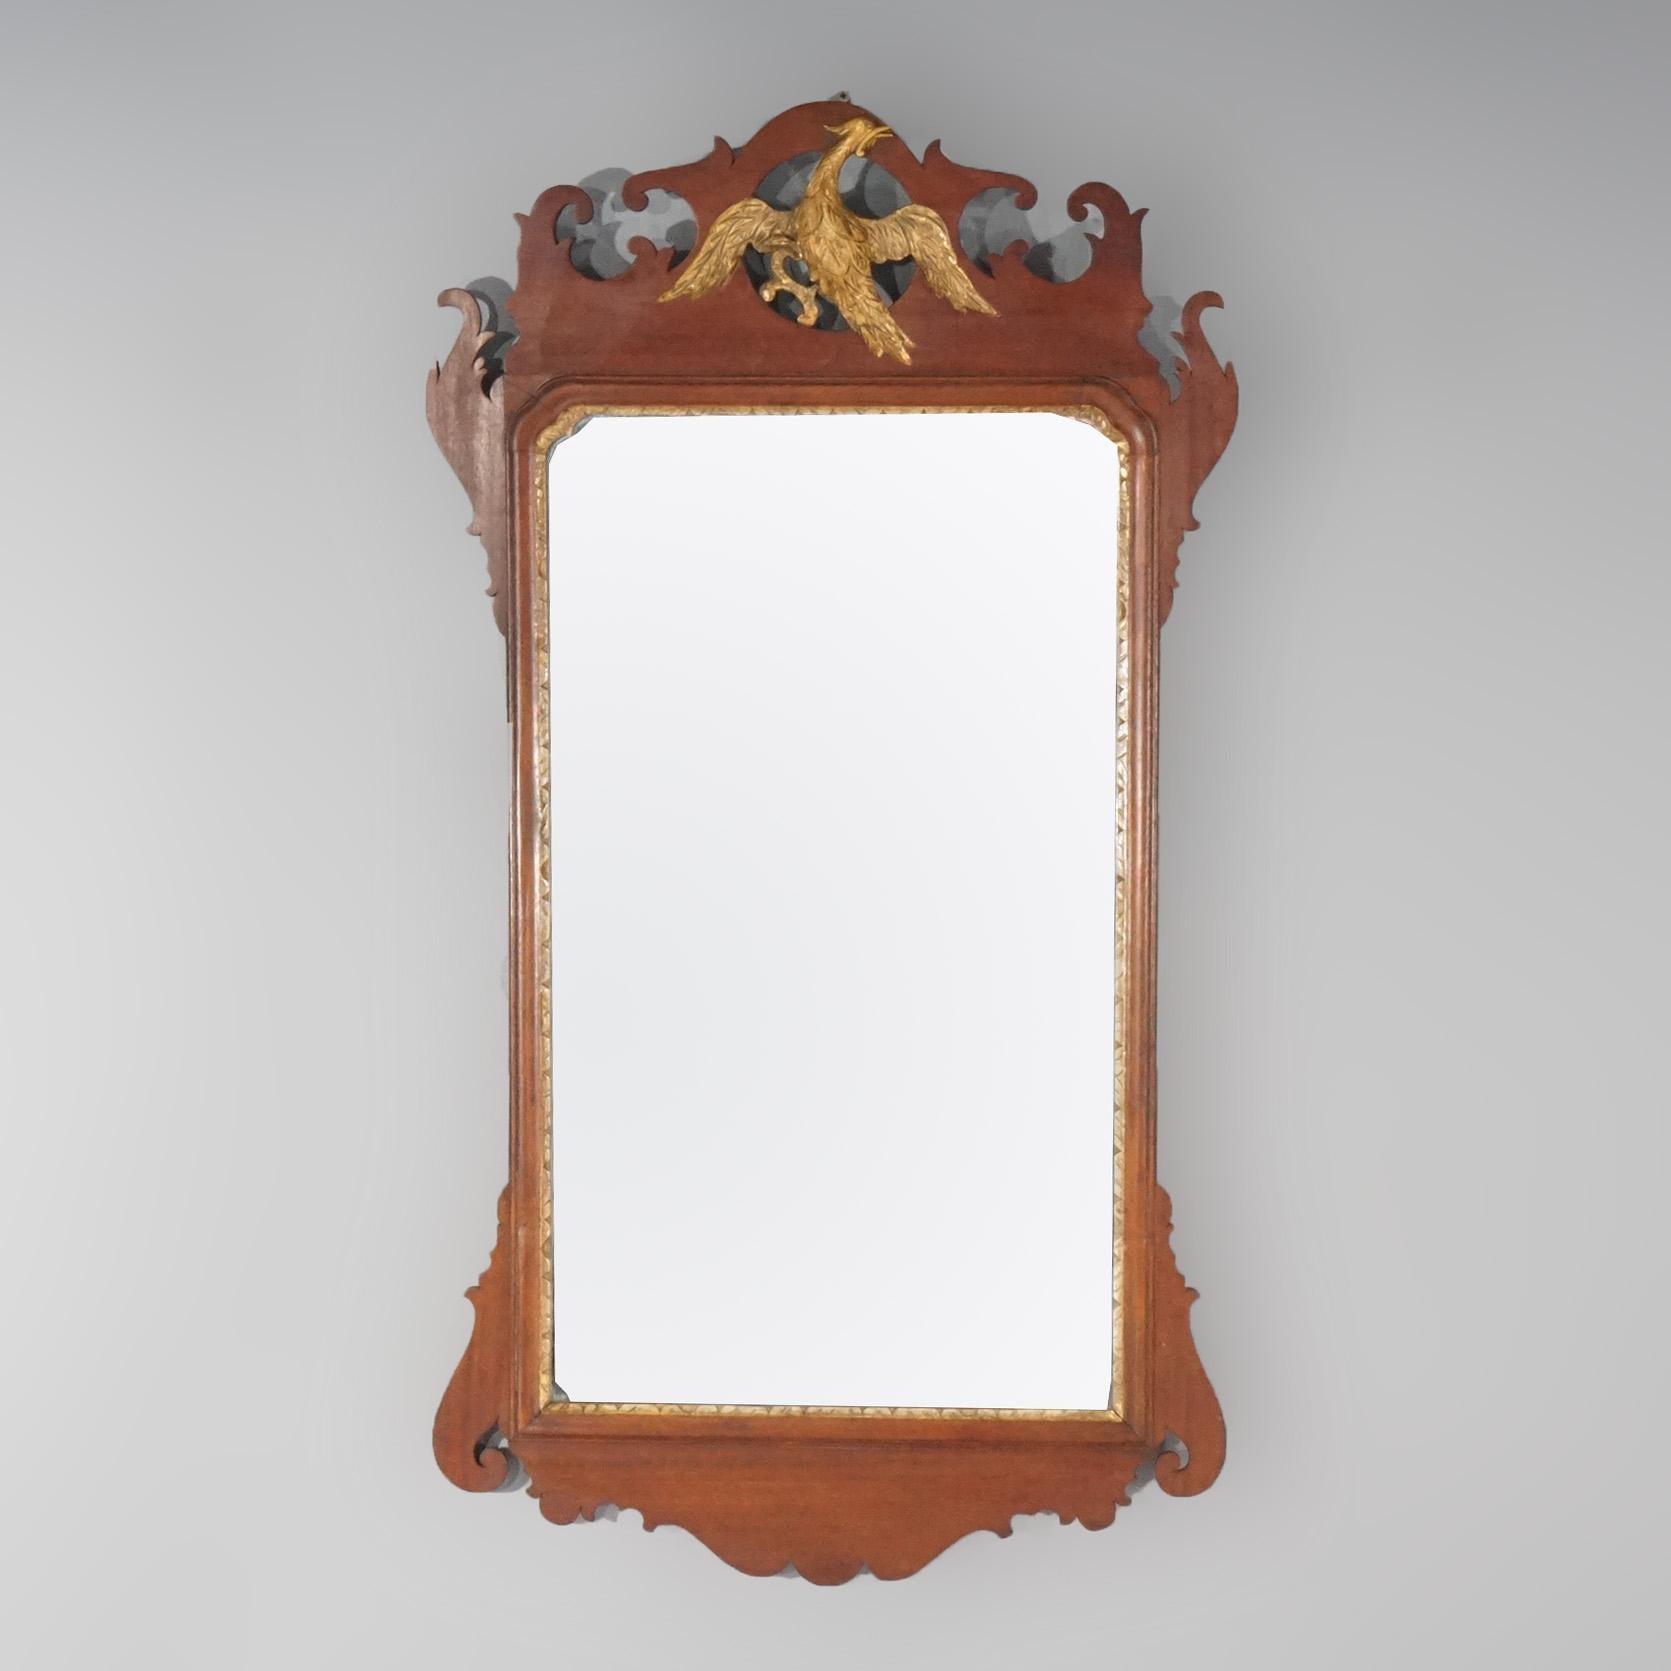 An antique figural Federal wall mirror offers mahogany construction with scroll and shaped frame having giltwood carved eagle at crest, 19th century.

Measures - 38.25